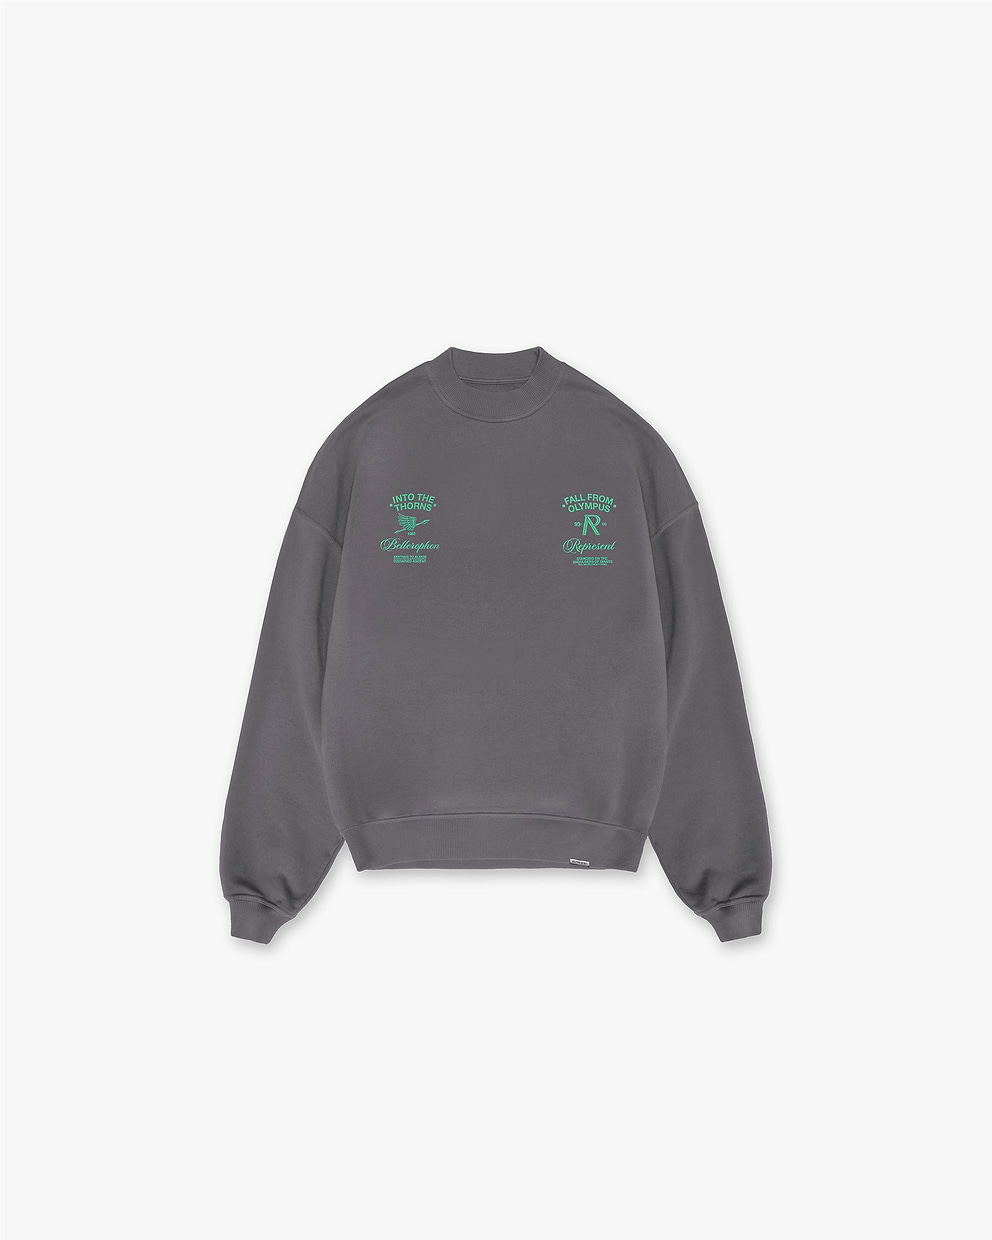 Fall From Olympus Sweater - Storm